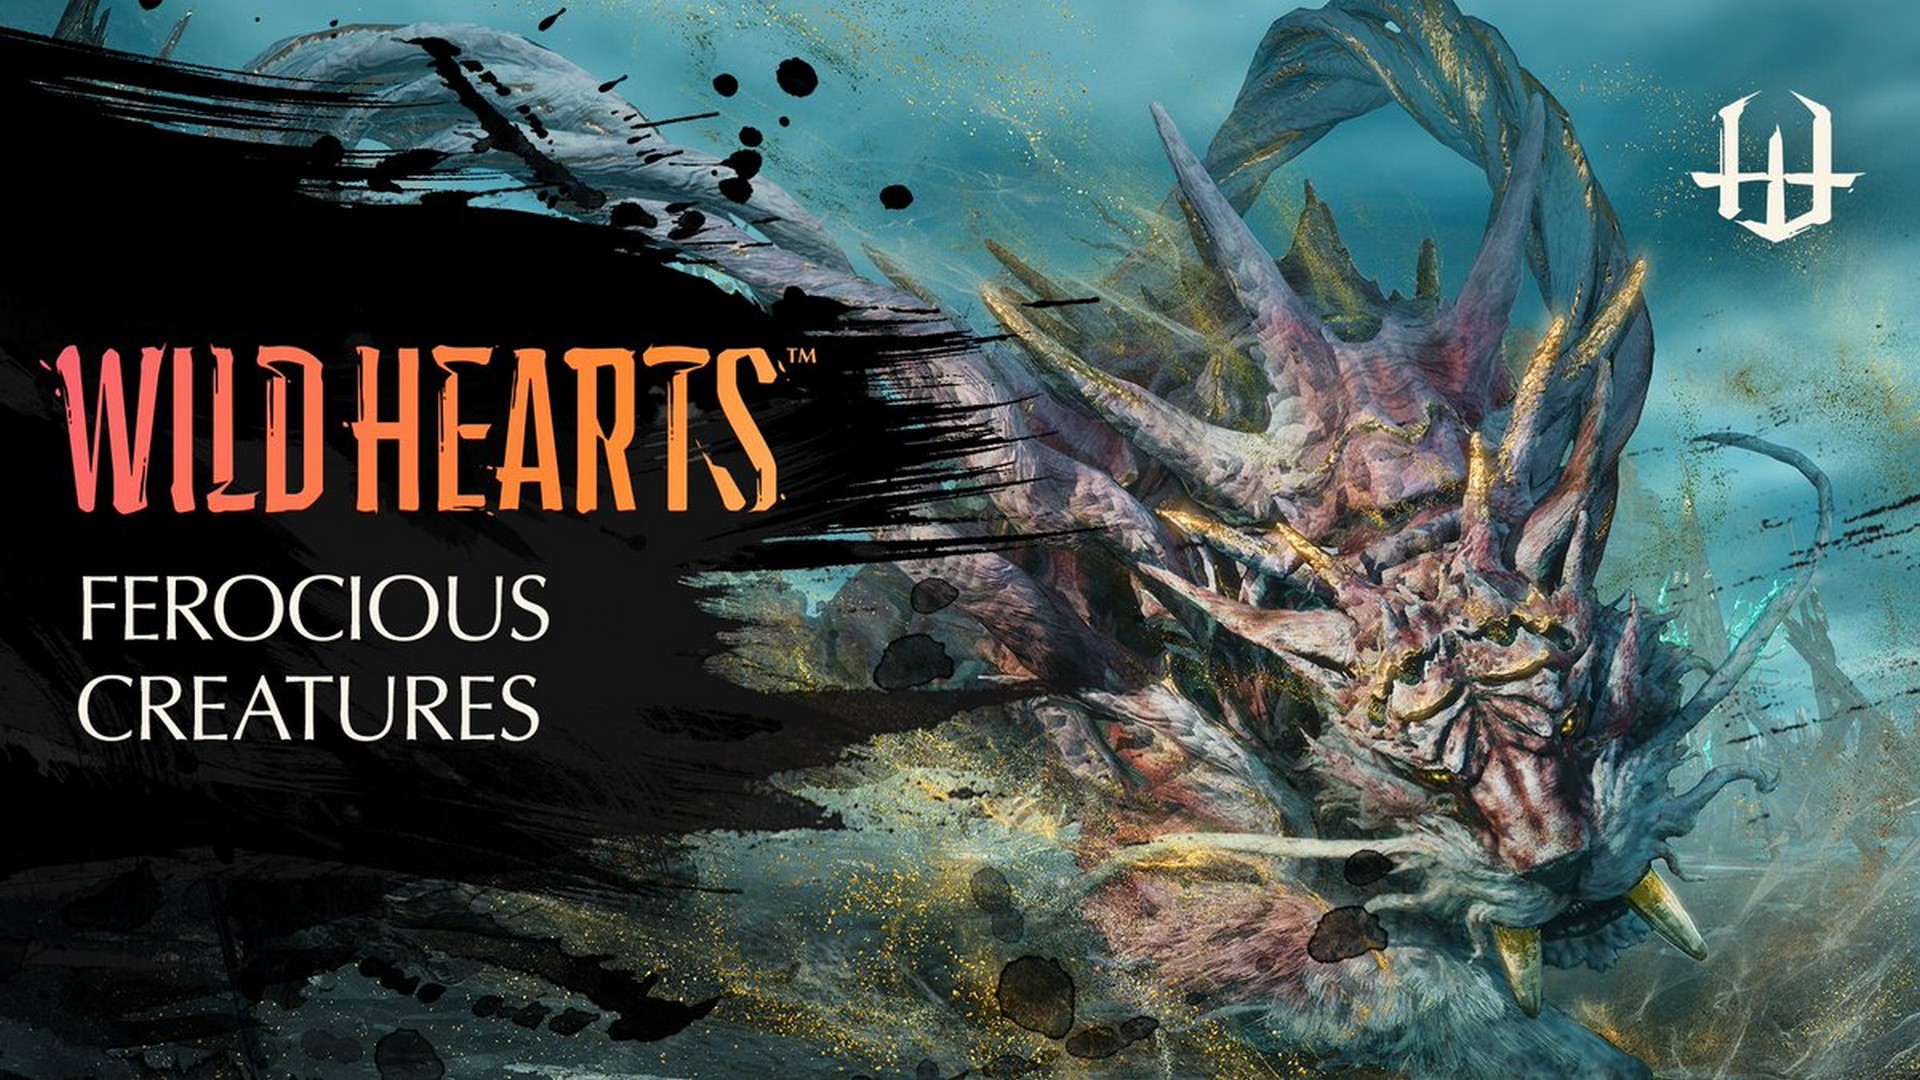 New Wild Hearts “Ferocious Creatures” Trailer Offers A Closer Look At Games’s Giant, Nature-Infused Keomono In Action